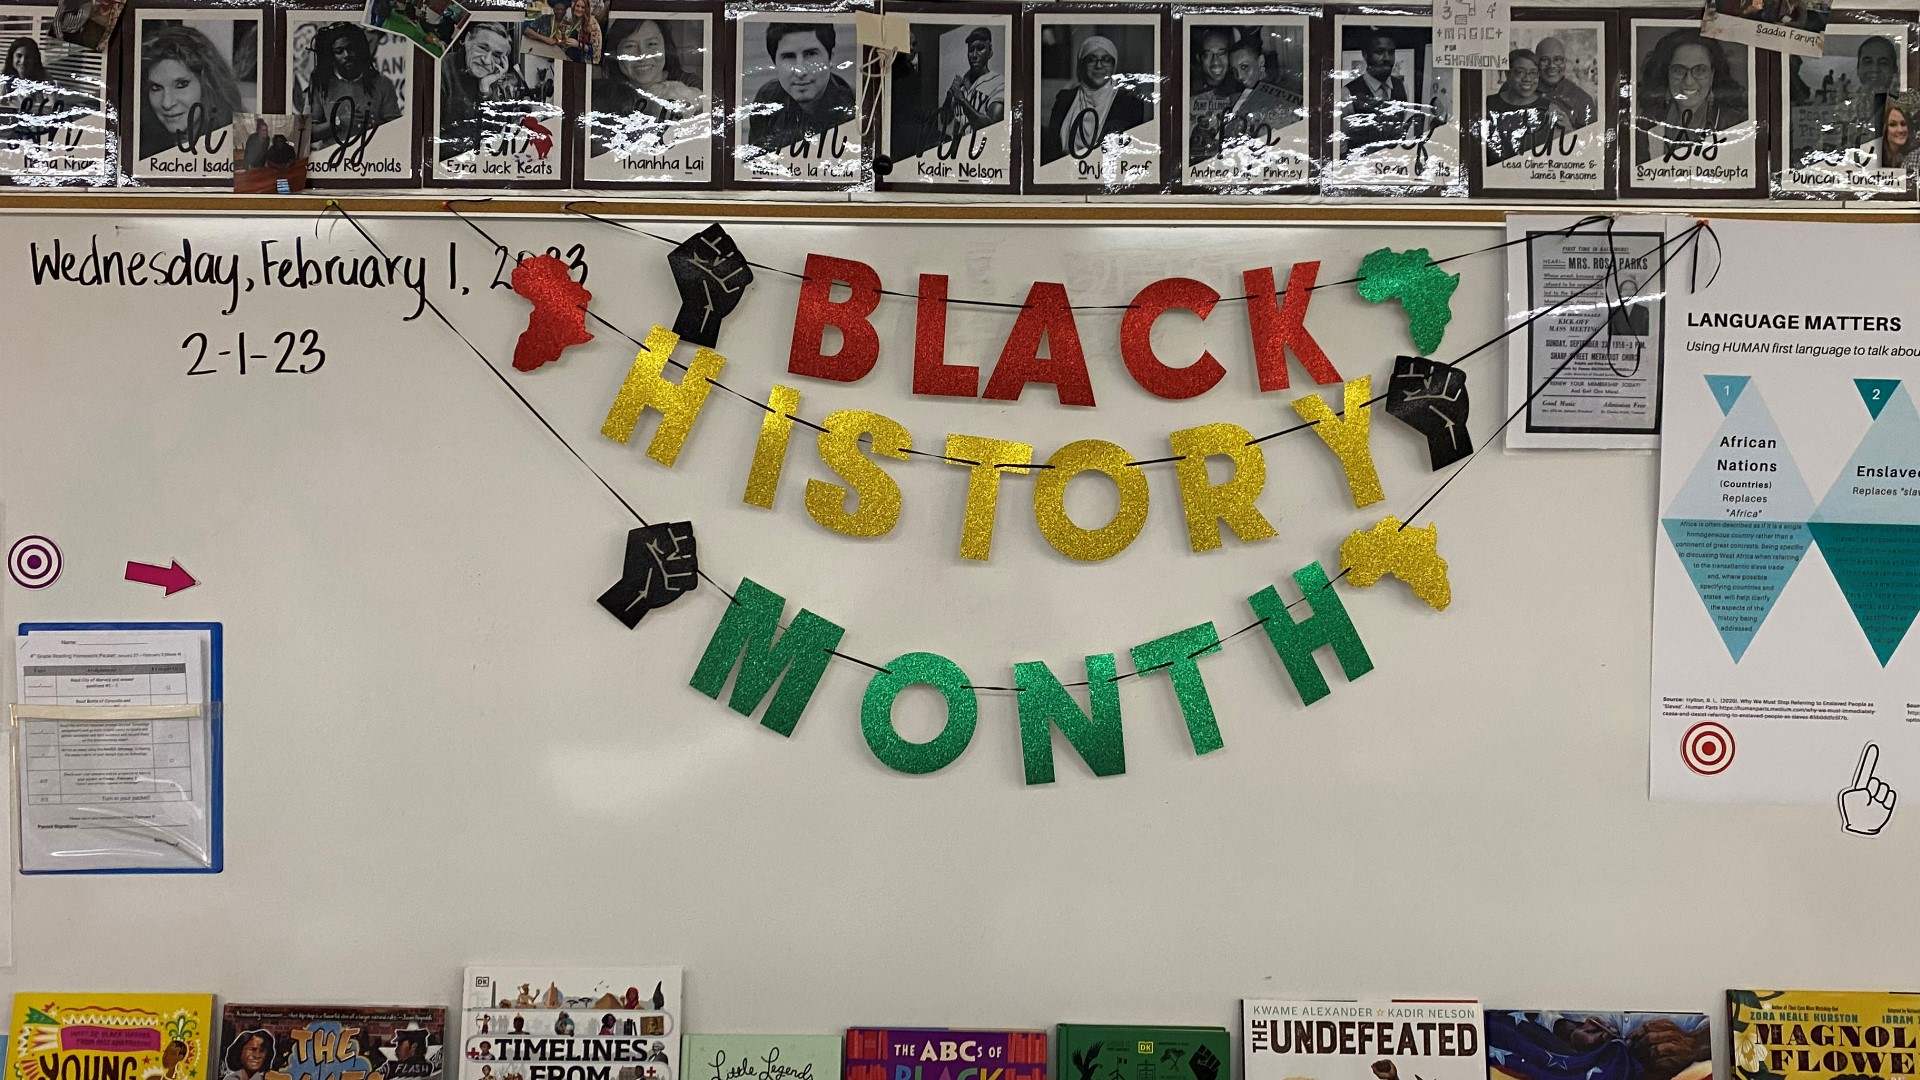 Many teachers recognize that for some students, this may be their first exposure to Black history and culture.